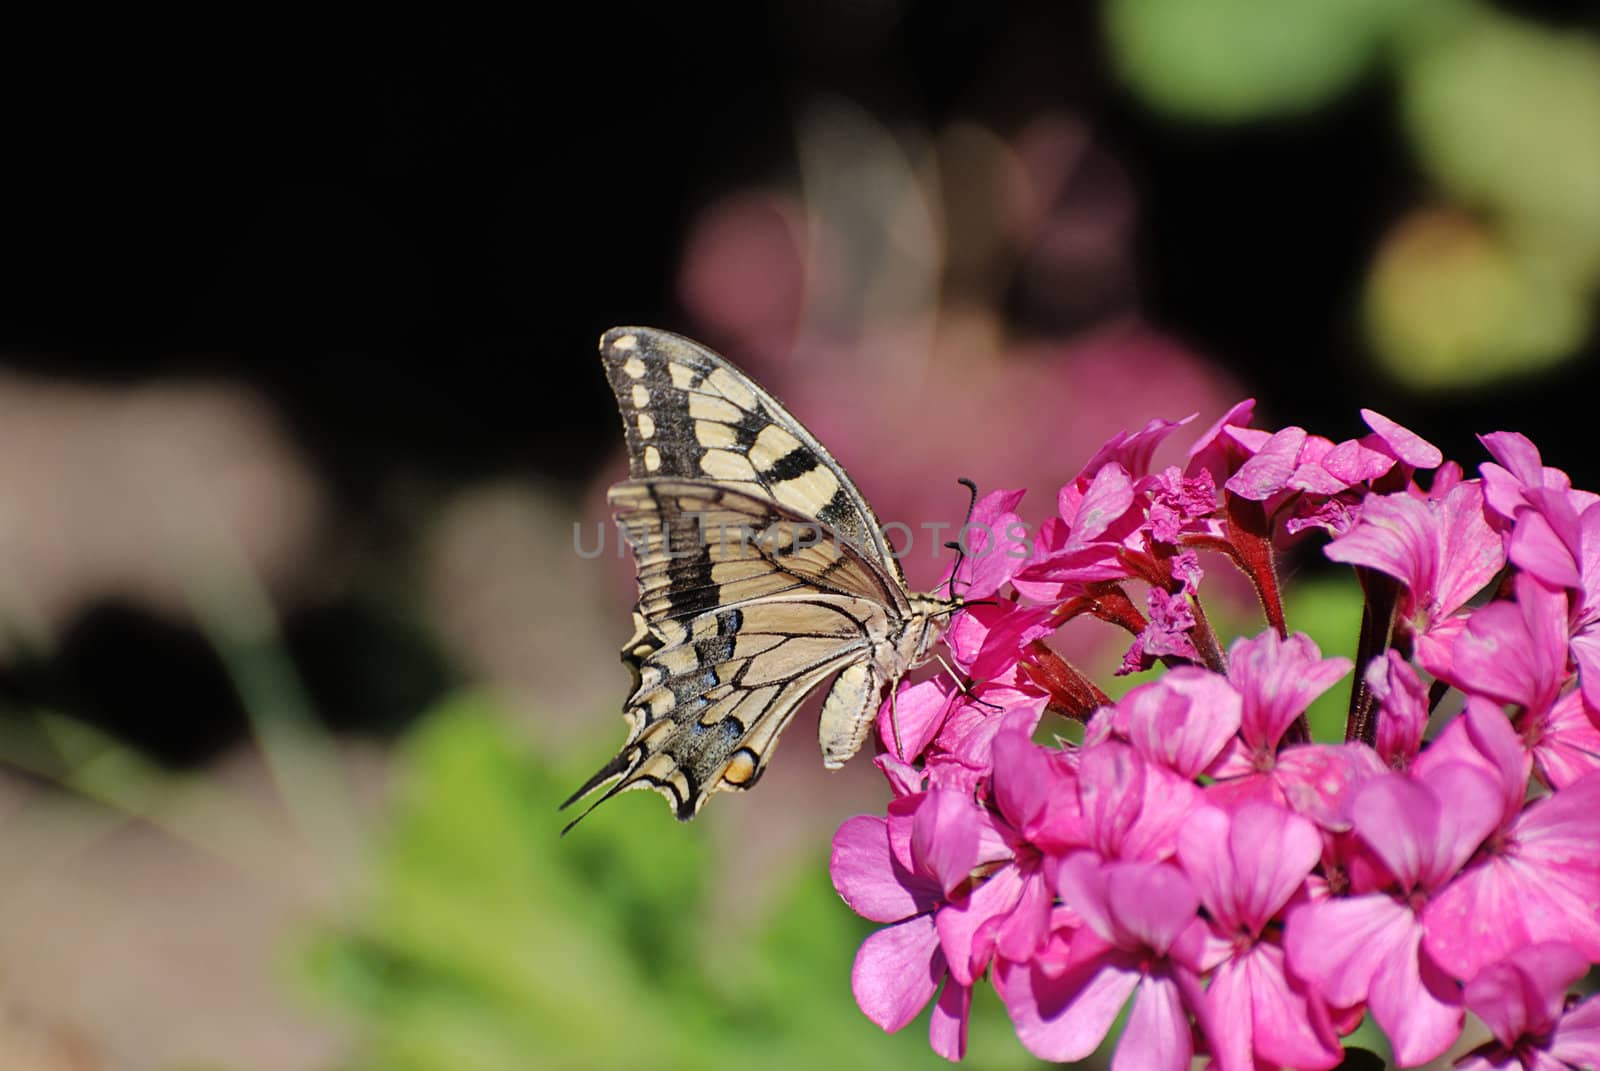 Swallowtail on a flower by fyletto